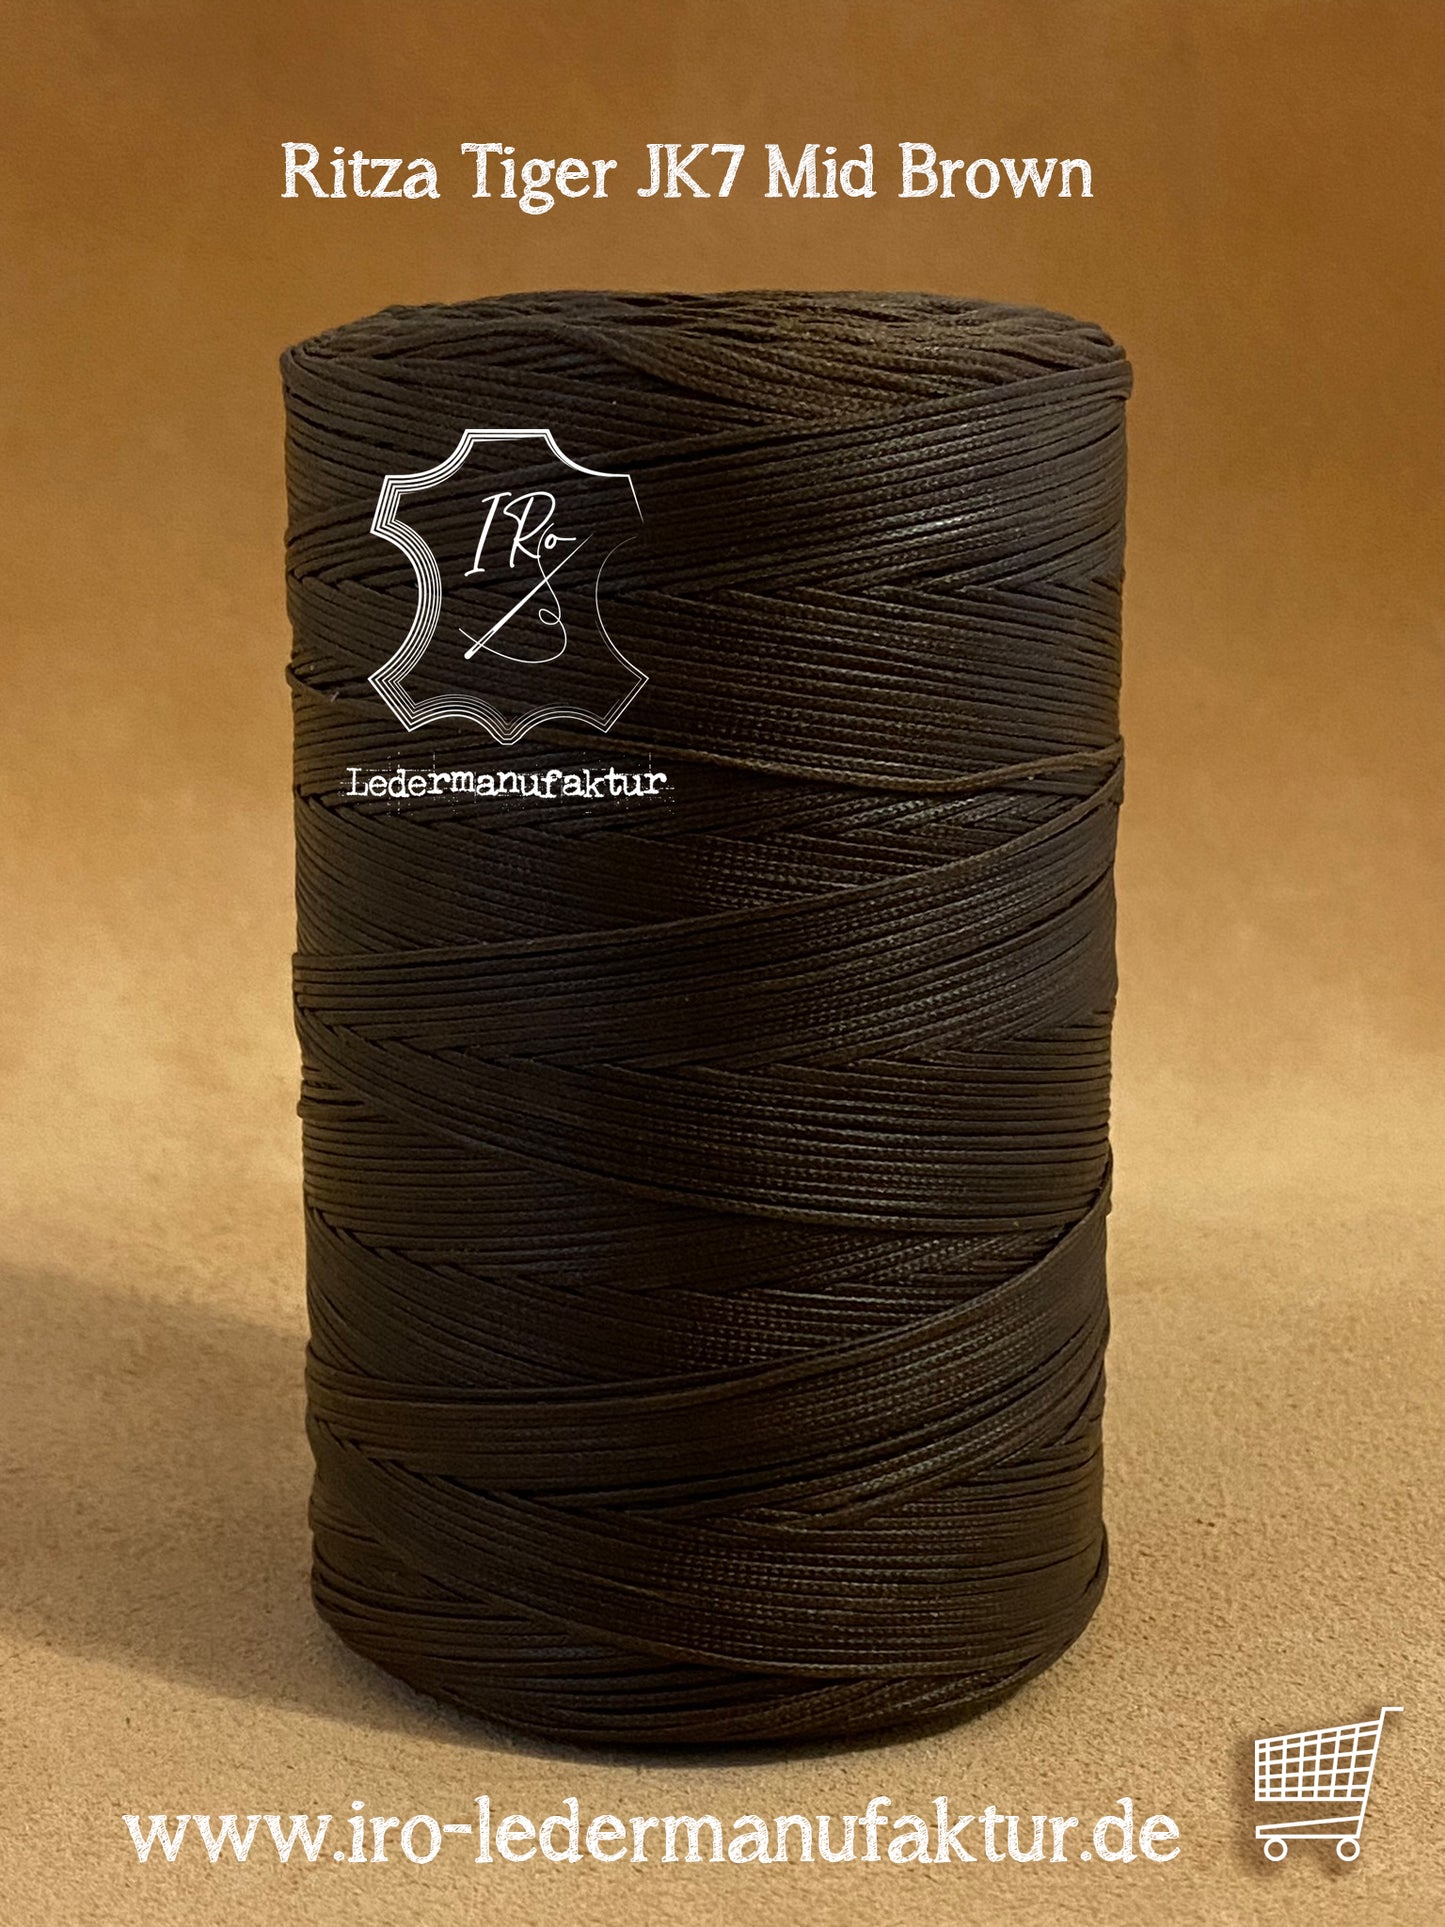 0,6 mm Ritza 25 tiger 50 m Spule | Sewing thread for leather, waxed. Hand stitch flat shape